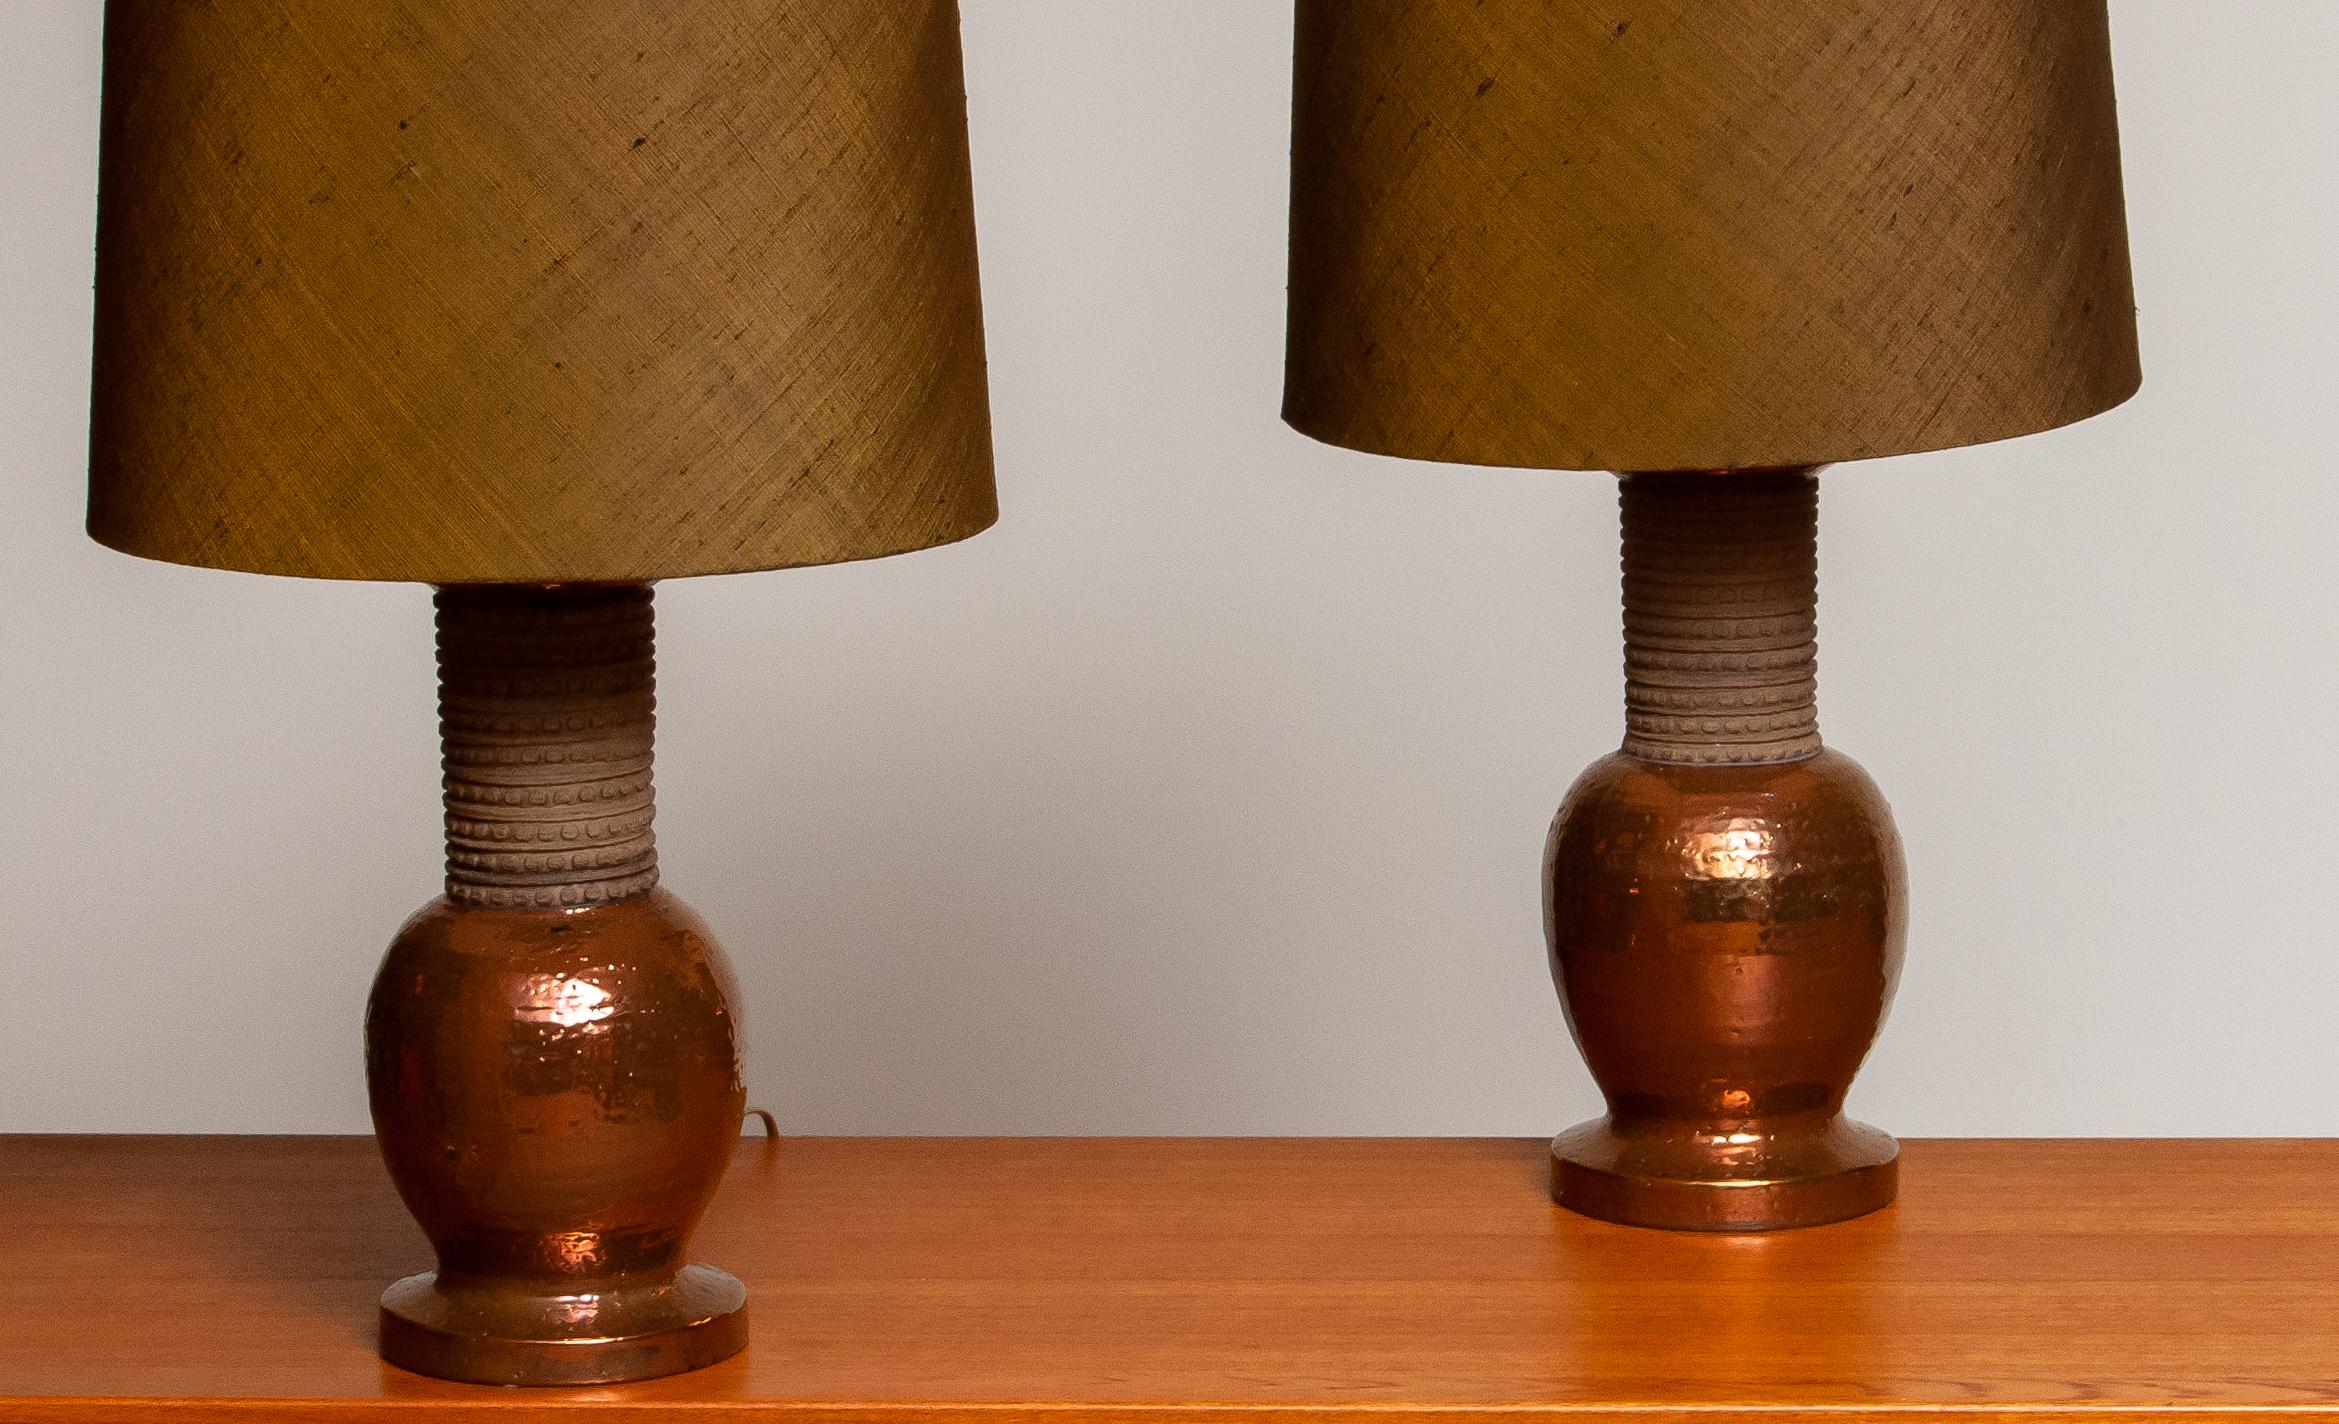 Italian 1960s, Pair of Ceramic and Copper Bitossi Italy Table Lamps for Bergboms Sweden